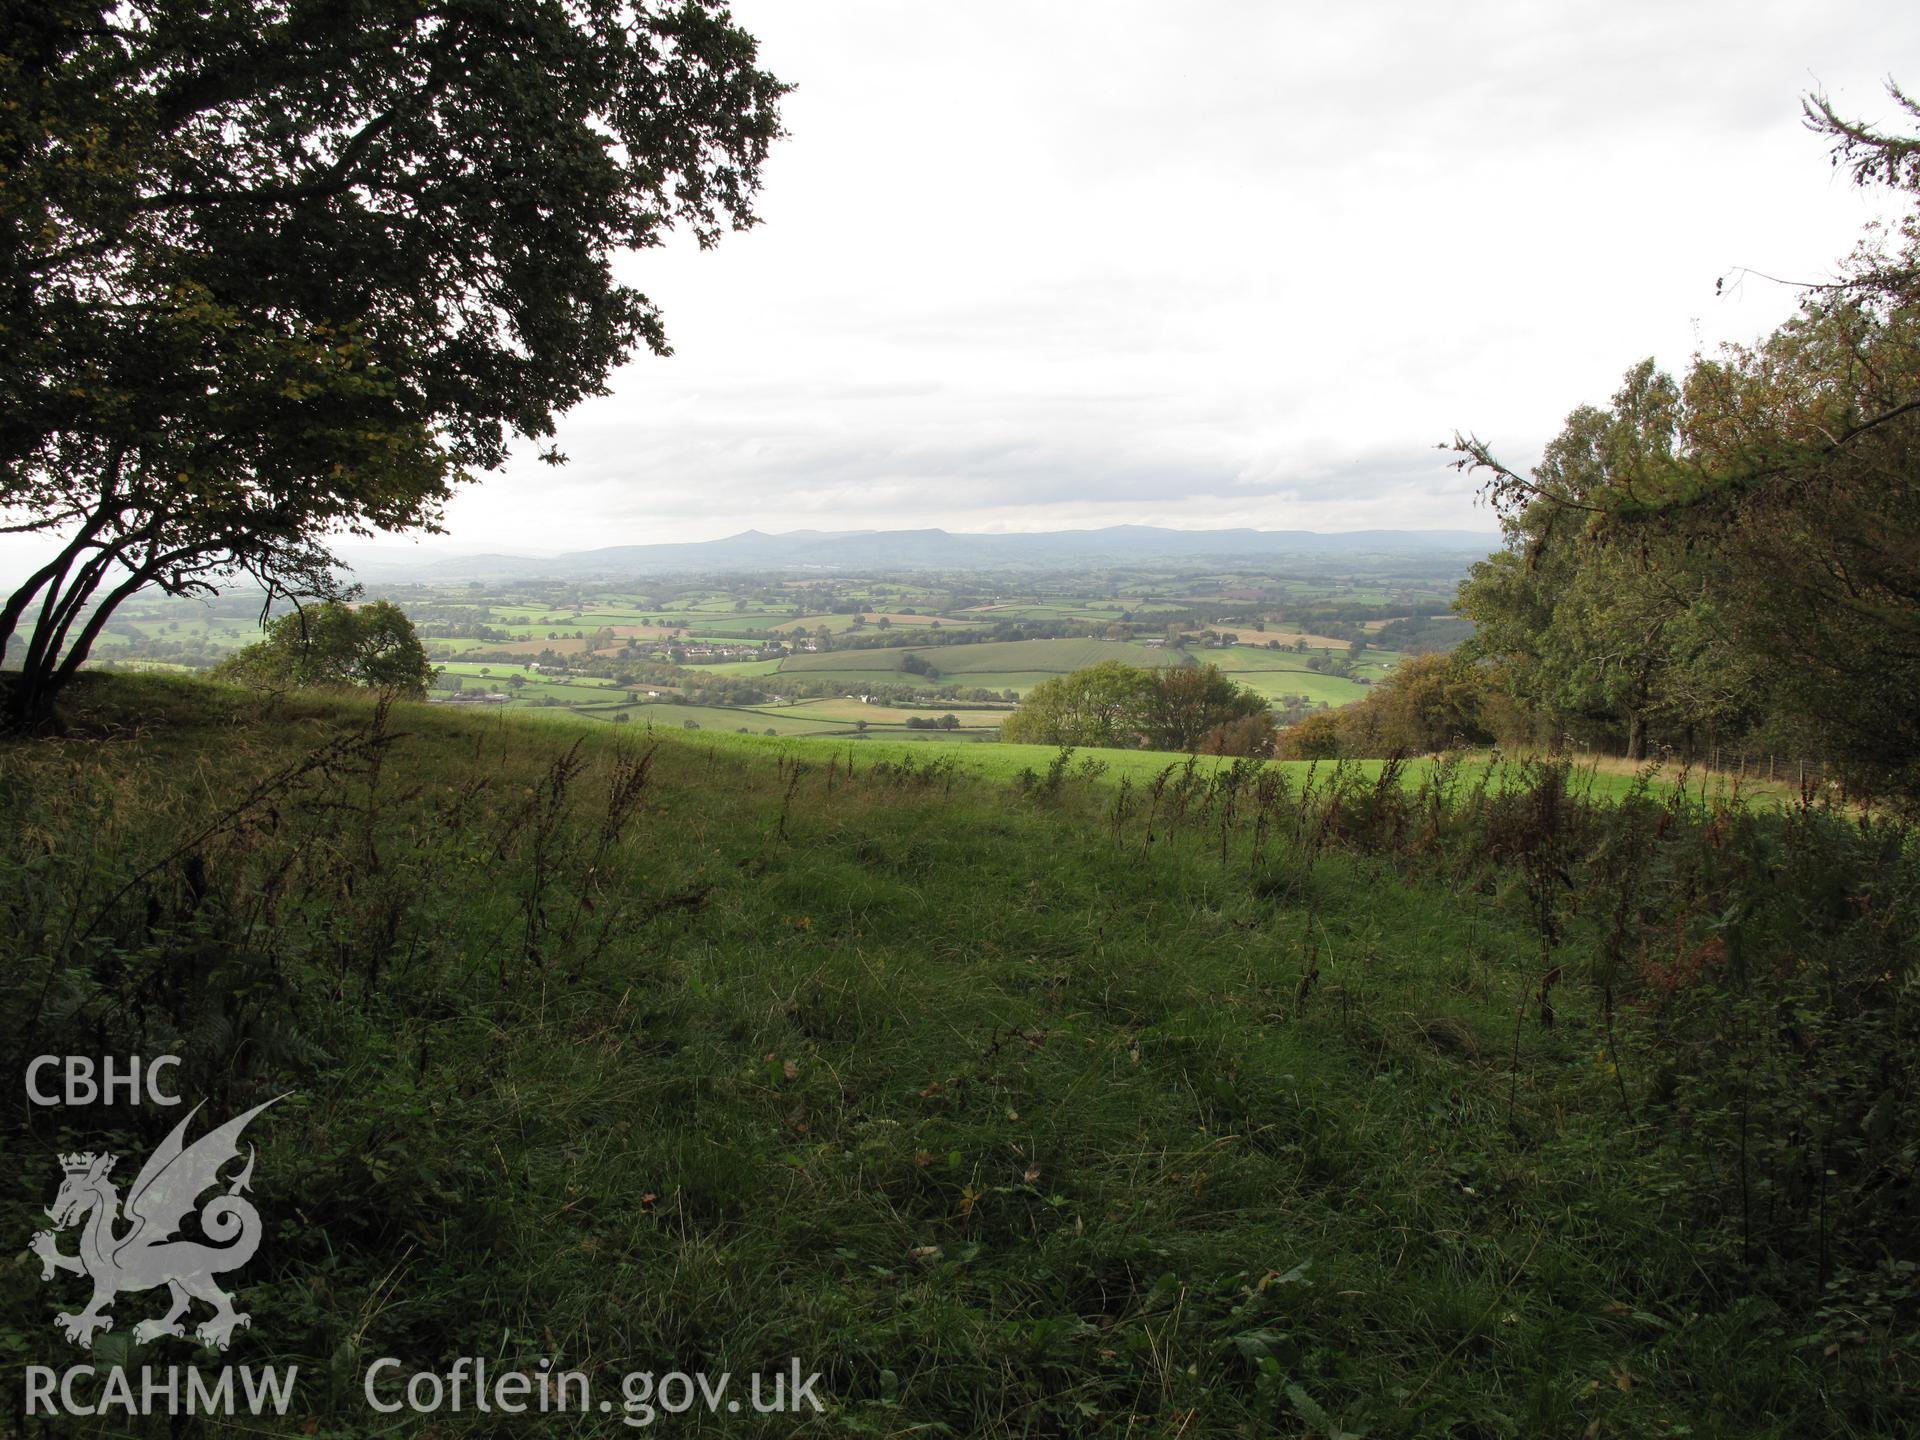 View from Craig-y-dorth to the north, taken by Brian Malaws on 26 September 2011.